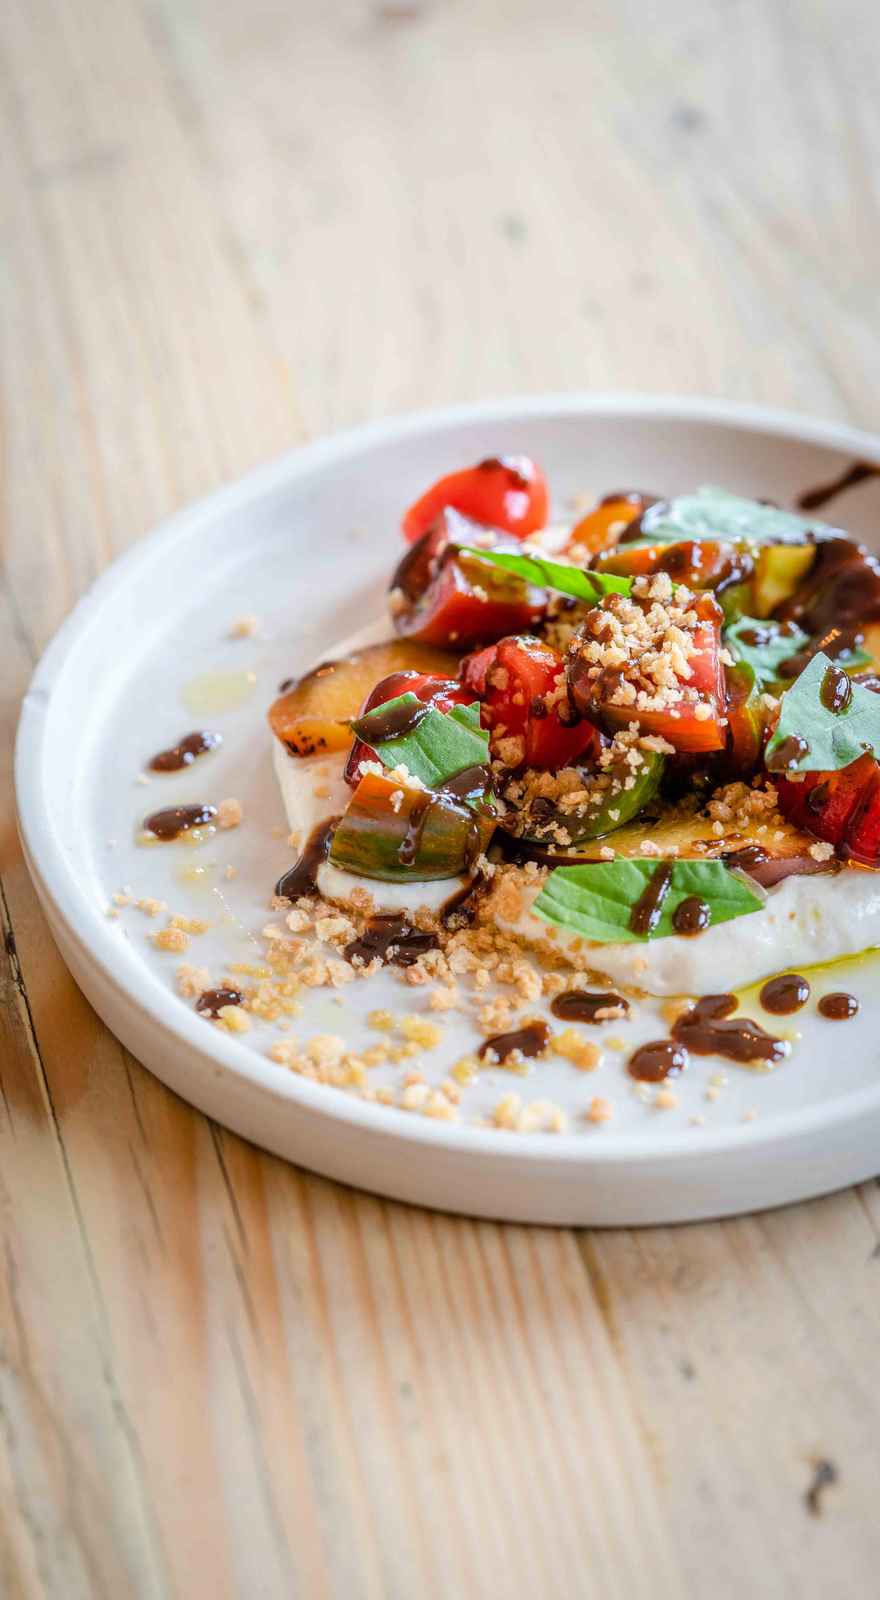 WIN an evening of sophisticated shared plates worth £100 at BANK 